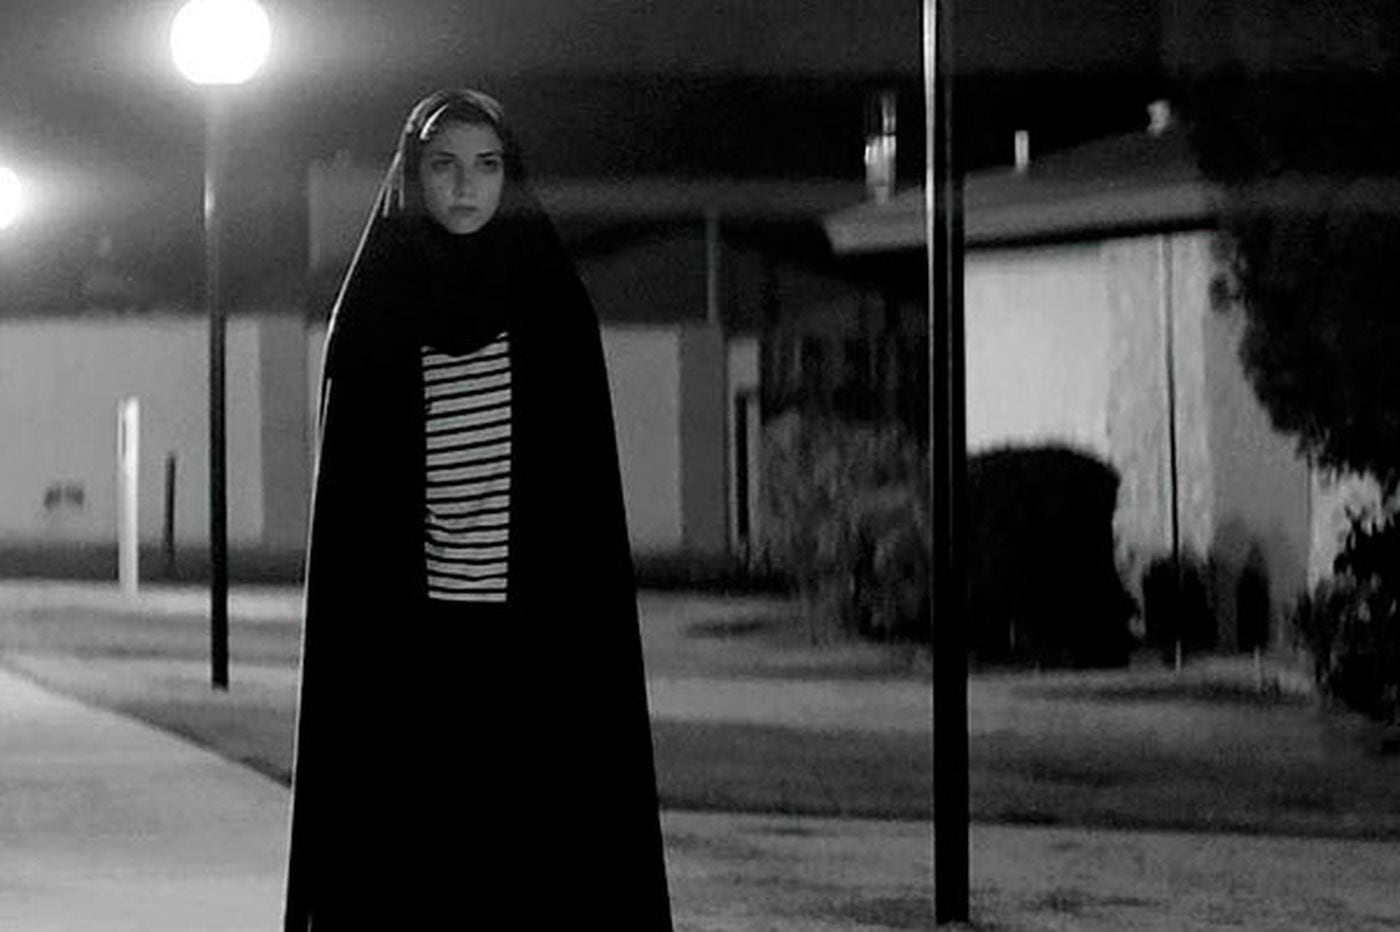 Image is from the film 'A Girl Walks Home Alone at Night' (2014). In an empty street, a young woman wearing a long coat and headscarf walks alone at night.